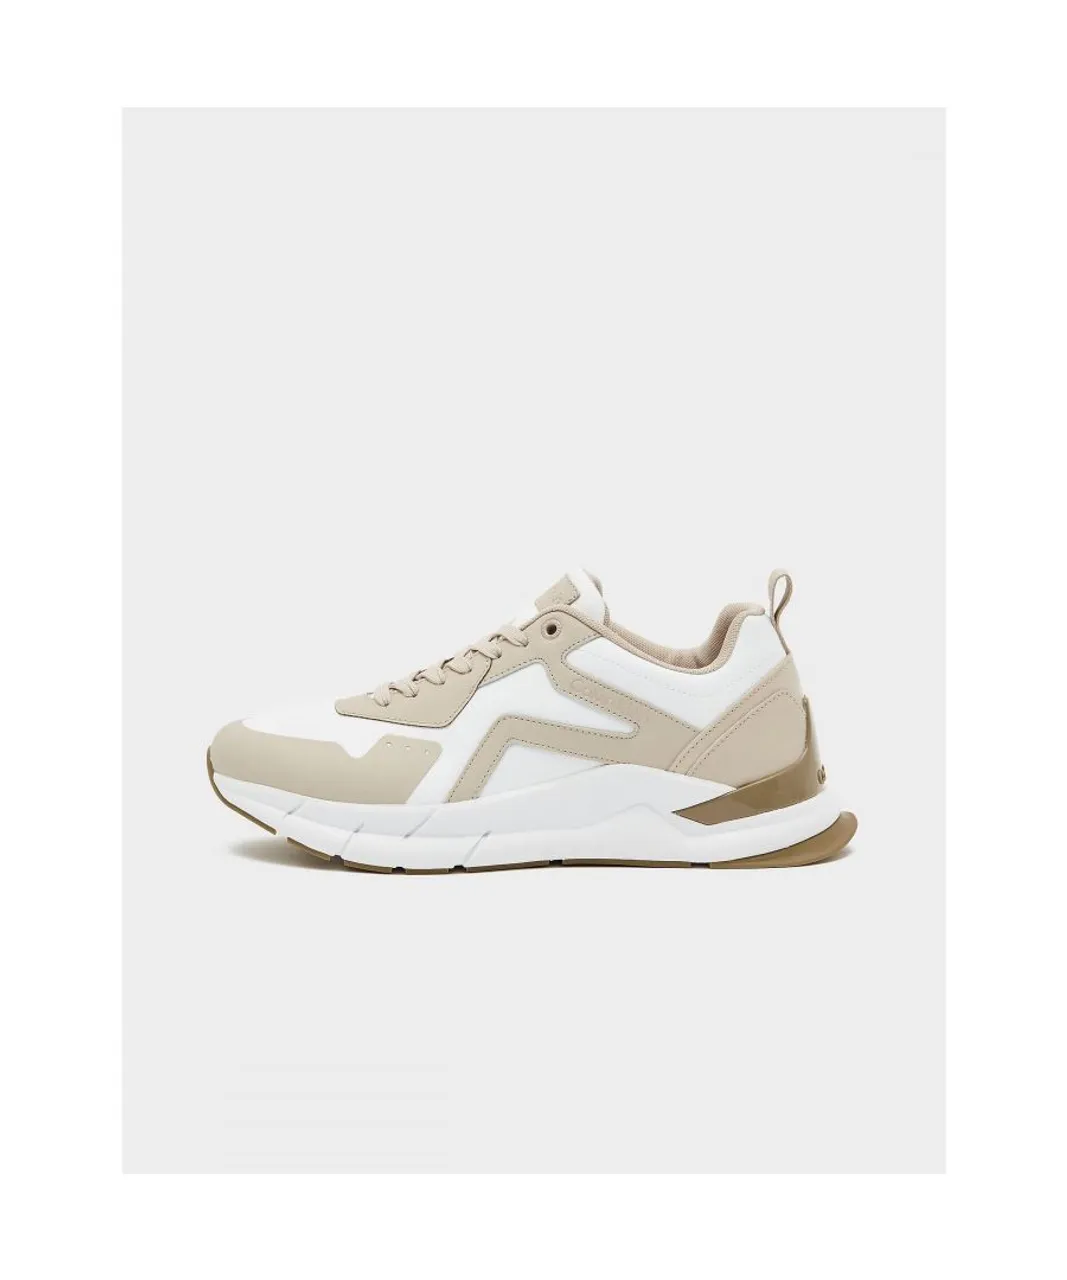 Calvin Klein Mens Low Top Lace-Up Trainers in White Leather